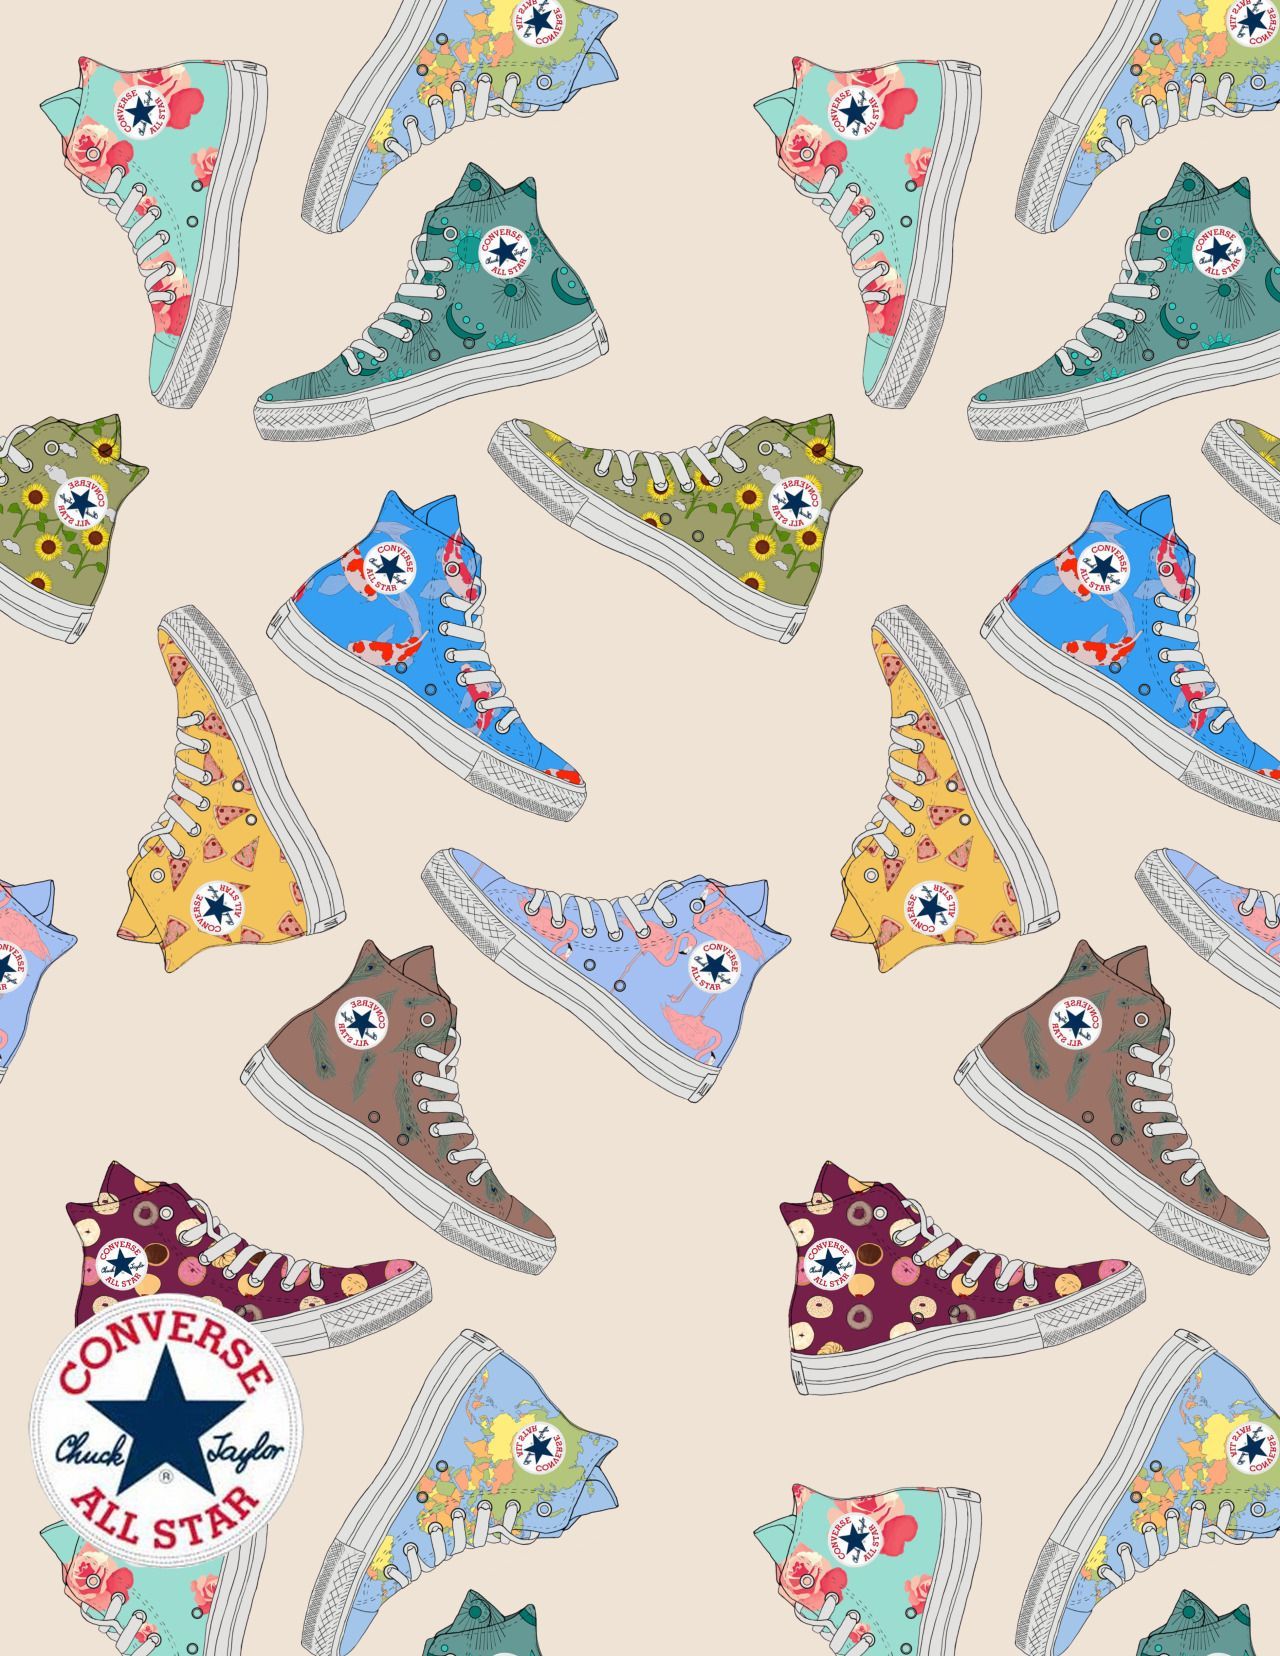 A pattern of sneakers with different colors and designs - Converse, pattern